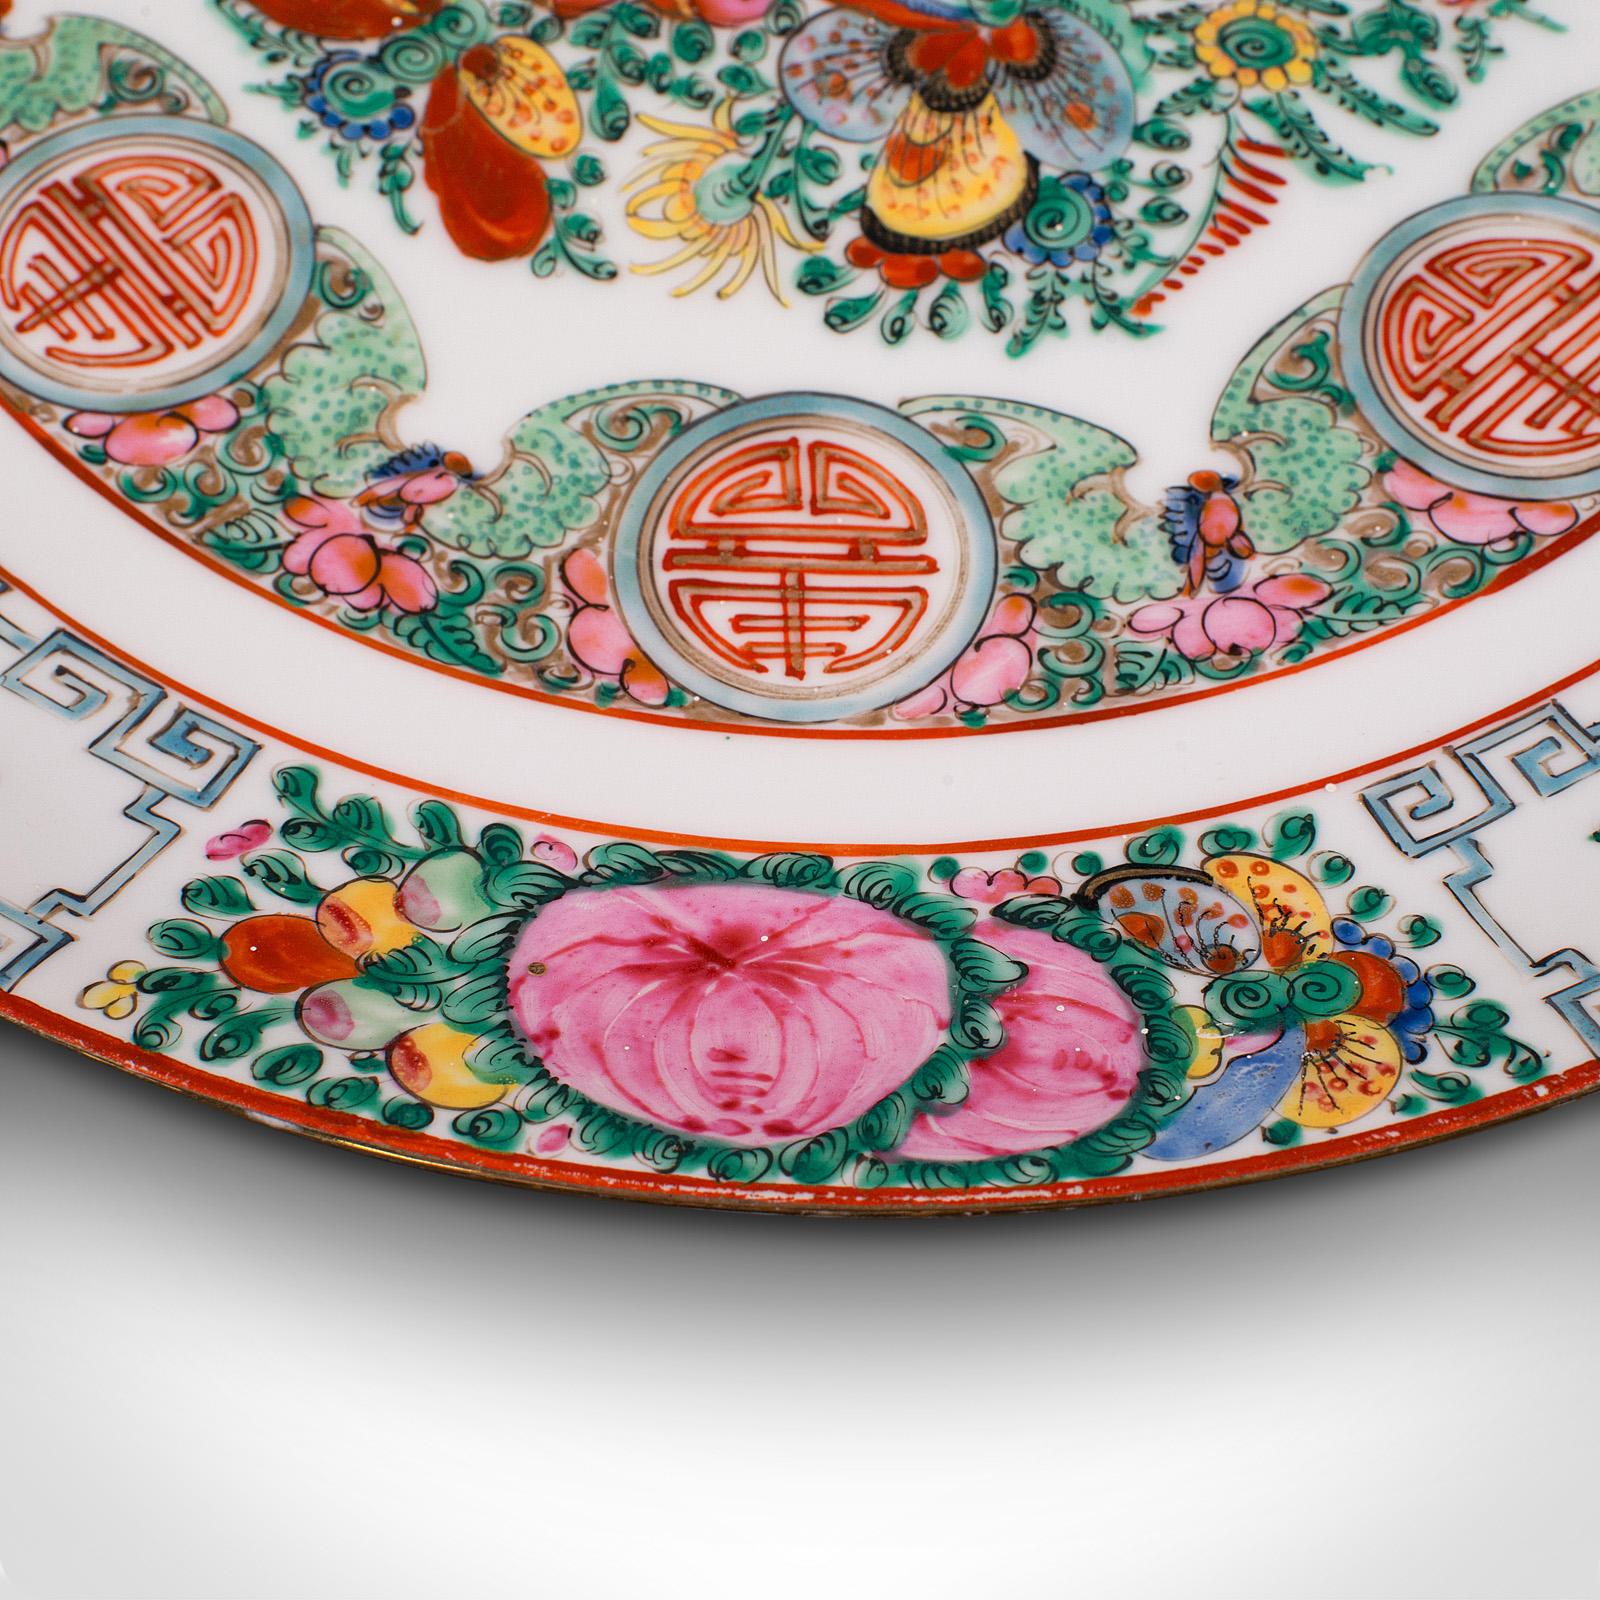 Antique Celebration Plate, Chinese, Ceramic, Decorative Charger, Victorian, Qing For Sale 1